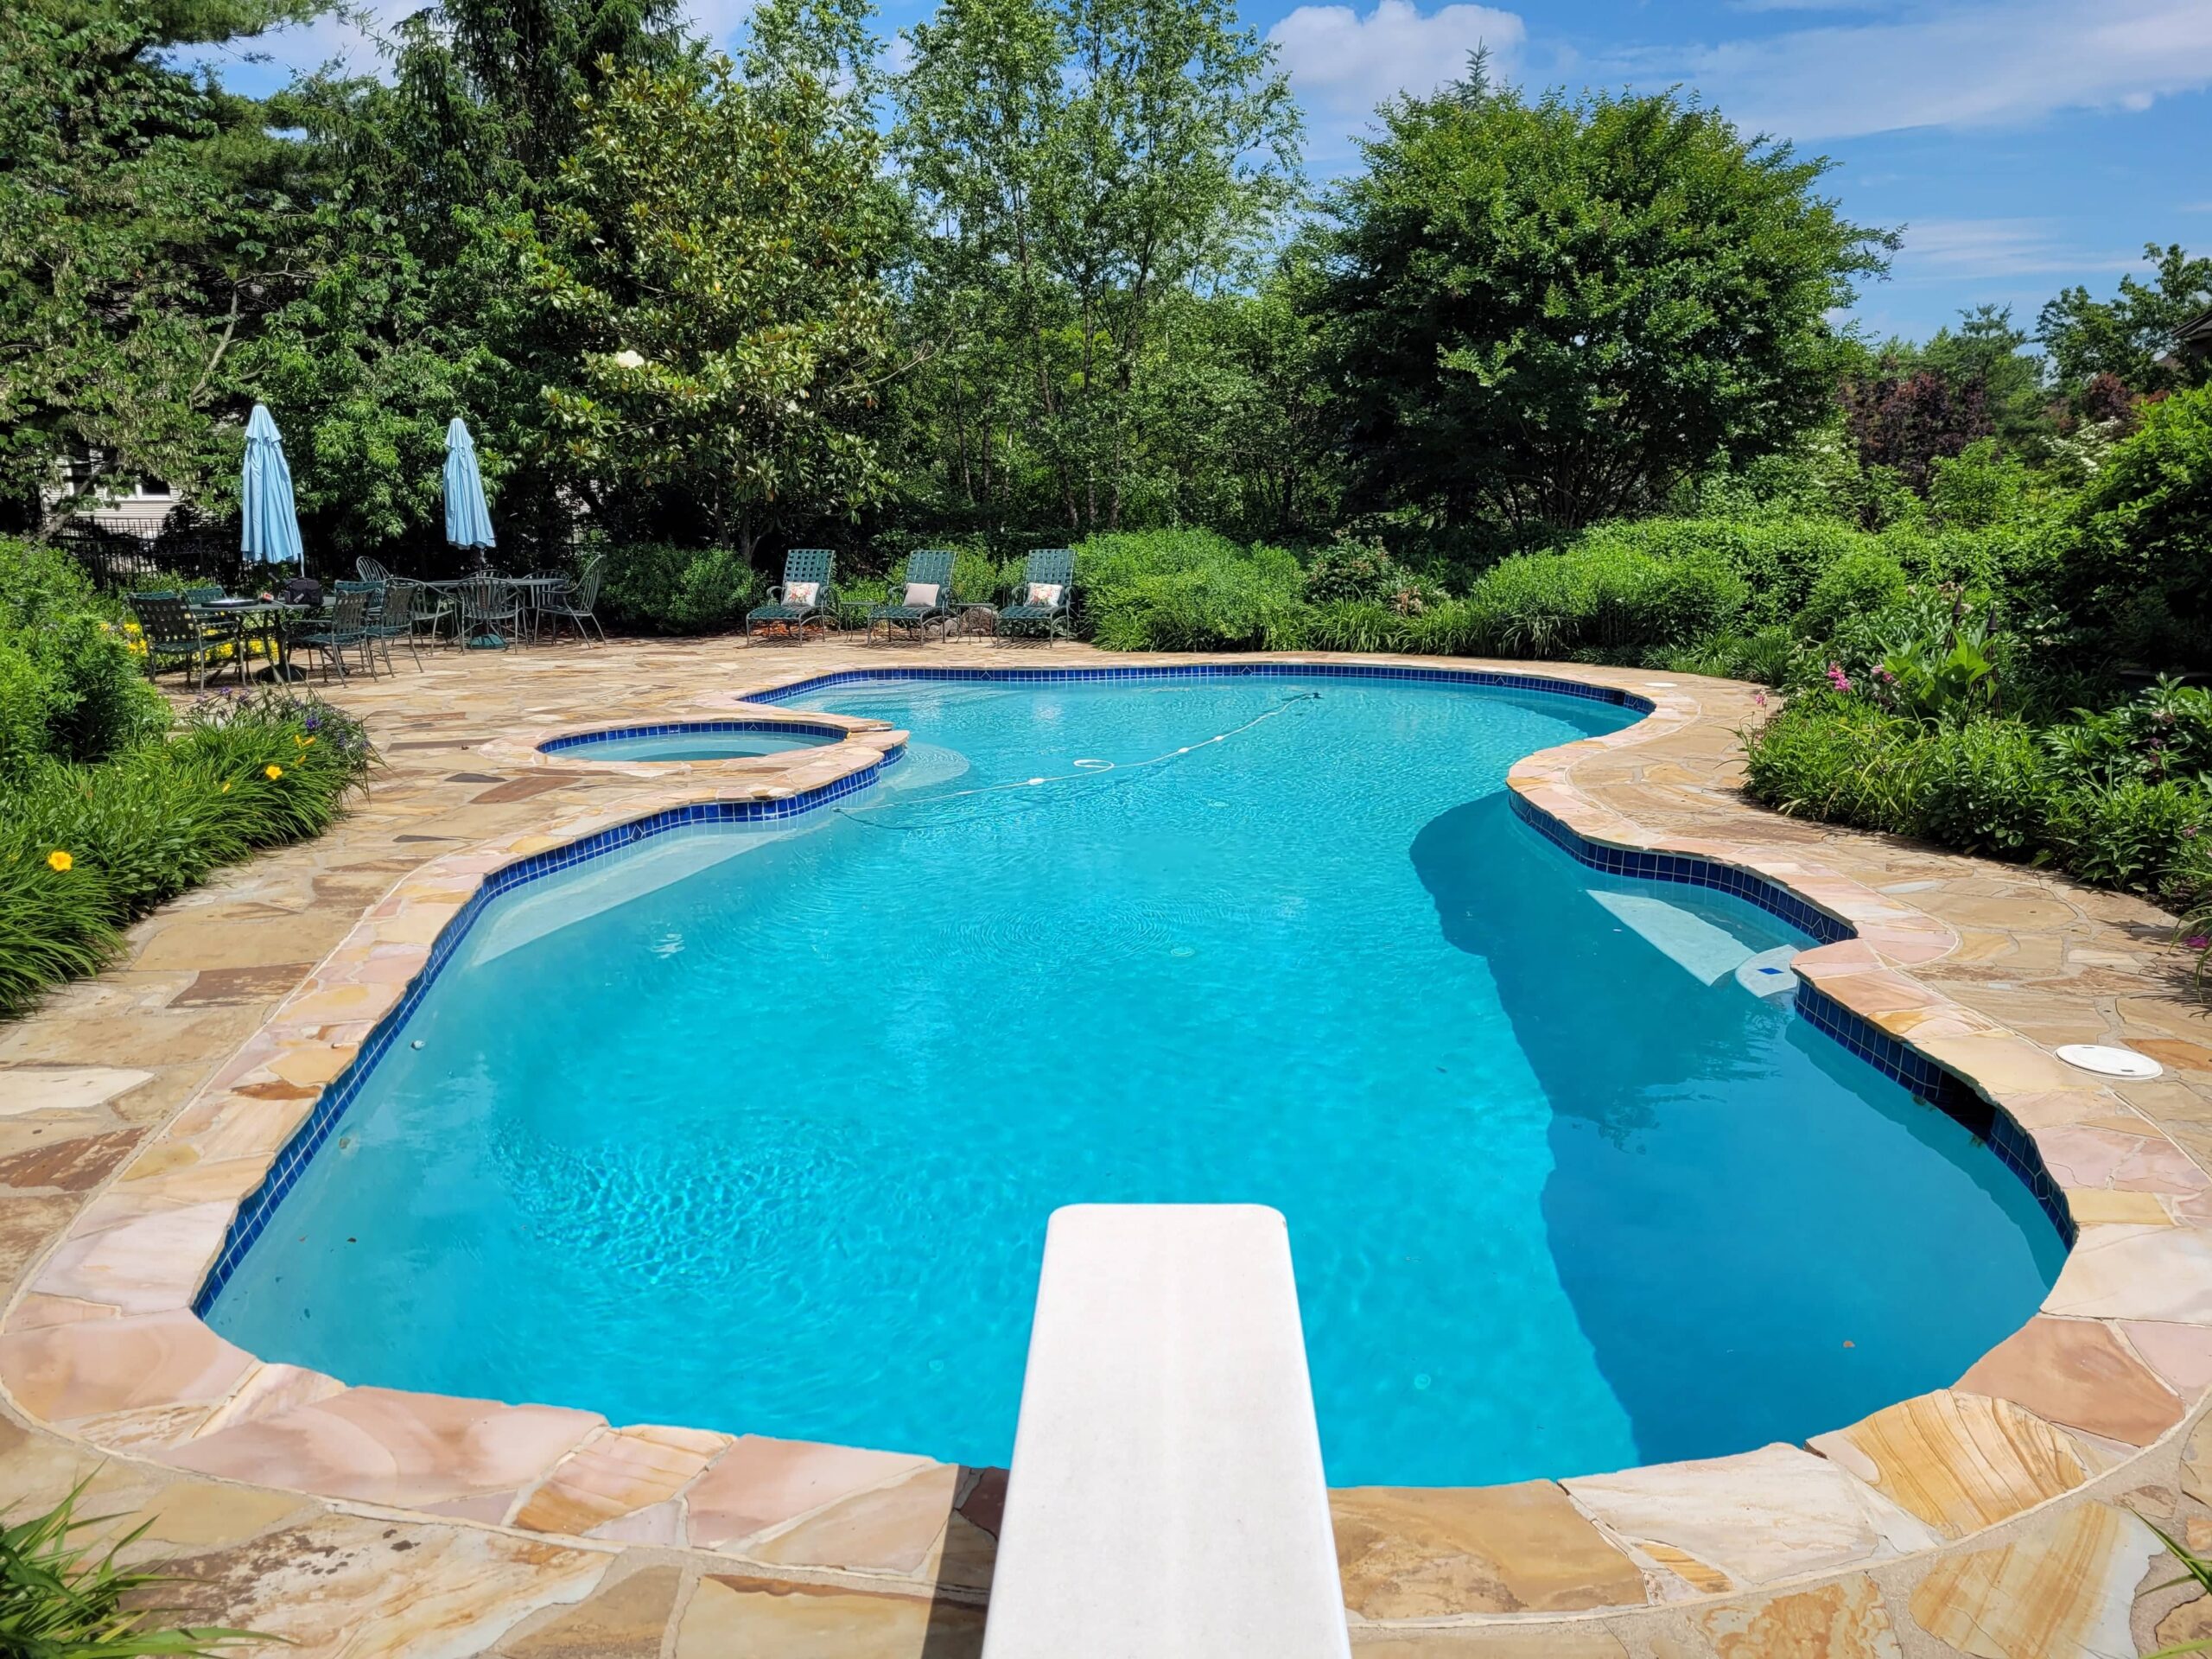 Featured Image for “When Do Pools Go On Sale?”